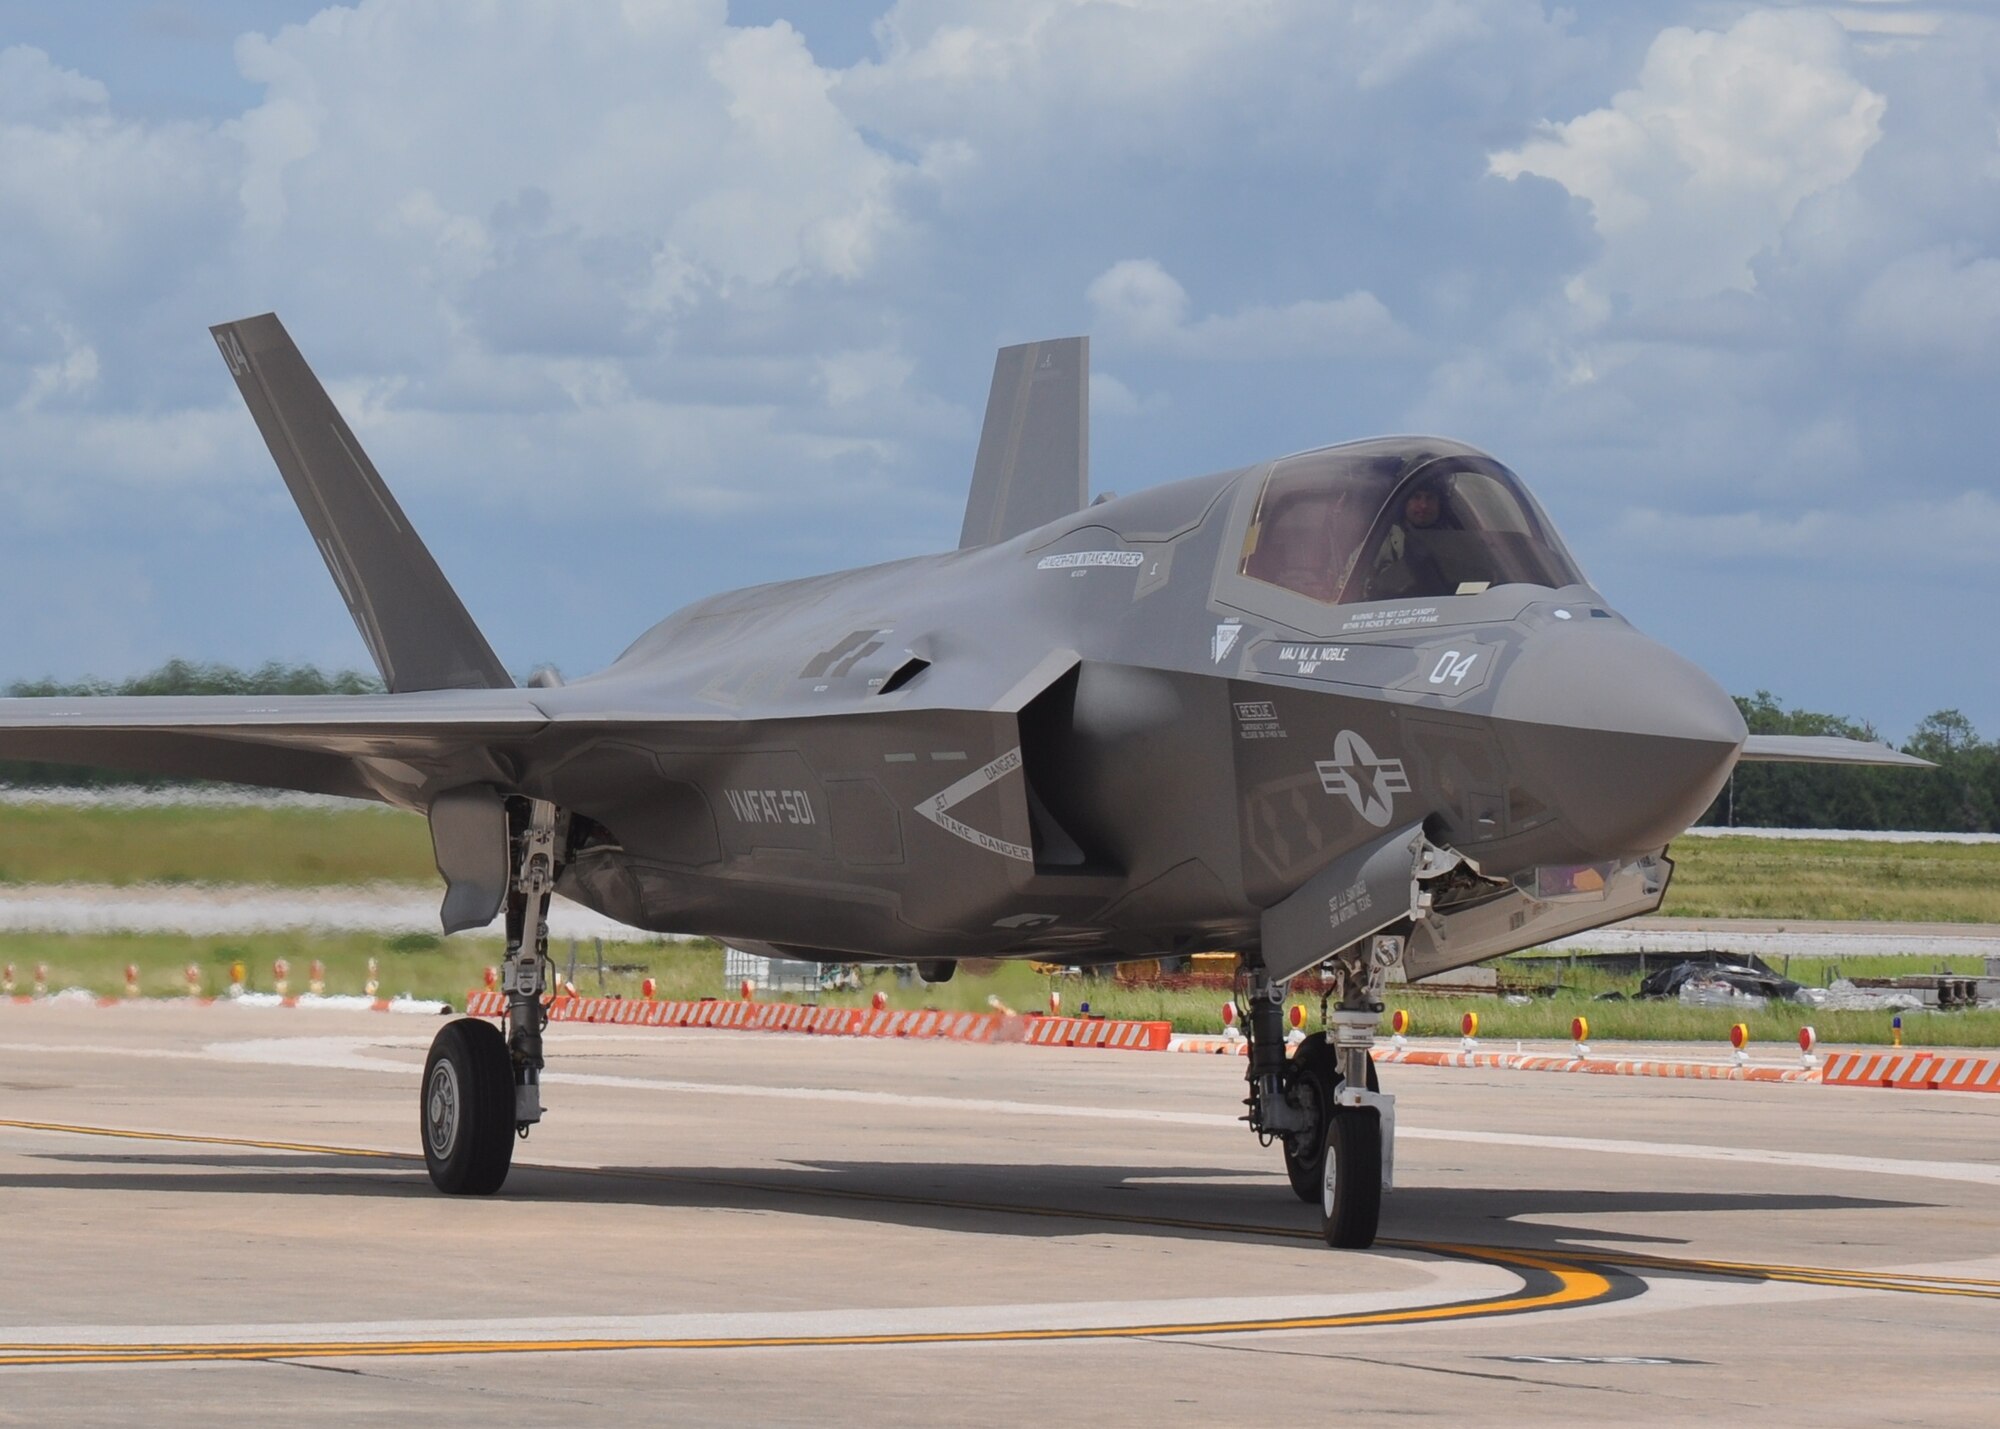 Marine Lt. Col. David Berke, commanding officer for the Marine Fighter Attack Training Squadron 501, taxis in from completing the 100th F-35 Lightning II sortie at the 33rd Fighter Wing, Eglin AFB, Fla. July 11. The 33rd FW’s 100 flights completed include 74 F-35A sorties and F-35B sorties. Current flying operations at the wing consist of Marine and Air Force fighter pilots checking out in the F-35 variants for each service.  (U.S. Air Force photo/Maj. Karen Roganov)